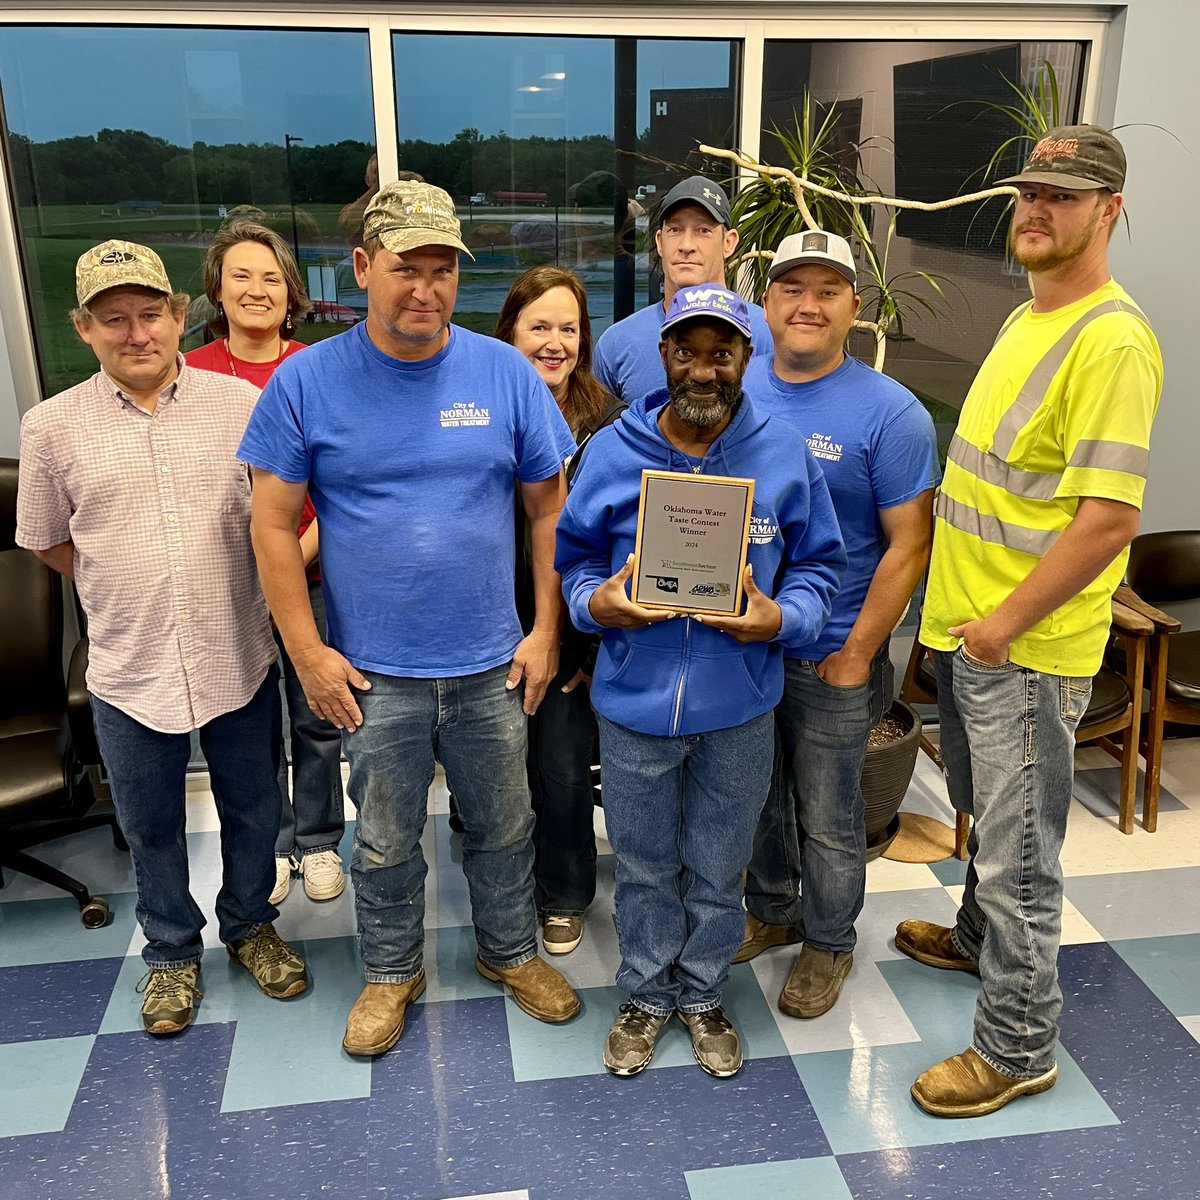 🏆🎉GRAND CHAMPS!

Our Water Treatment Division has claimed first place in the Oklahoma Water Taste Test Contest!

Competitors at the contest won this month included systems from Midwest City, Tulsa and Broken Arrow. Way to go, Norman! 💧☝🏽 

#NormanOk #LocalGov #WaterIsLife